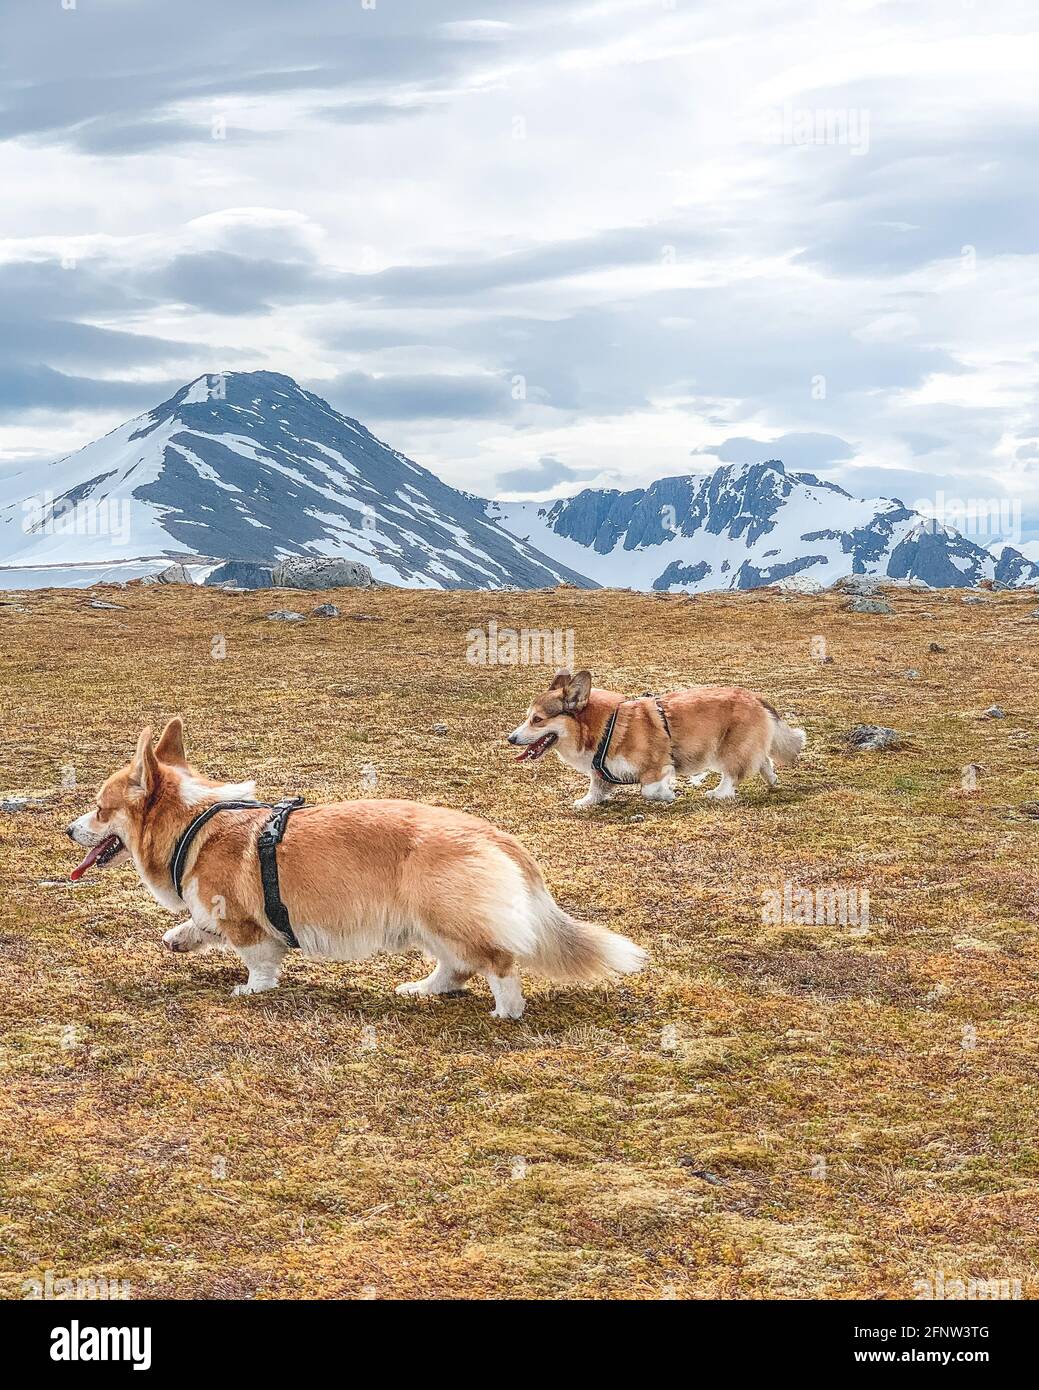 The highest mountain Marianne has undergone an epic dog walk is 5131 feet peaks of Slogen, Norway. Also known as 'the Queen of Sunnmørsalpane'. NORWAY Stock Photo